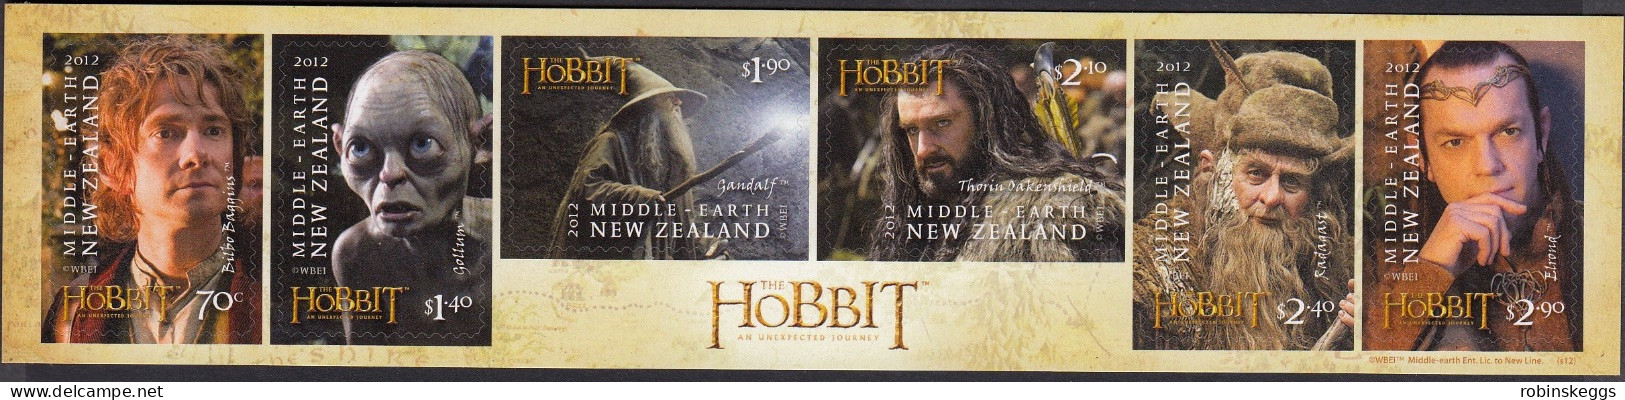 NEW ZEALAND 2012 The Hobbit: An Unexpected Journey, Strip Of 6 Self-adhesives MNH - Fantasie Vignetten